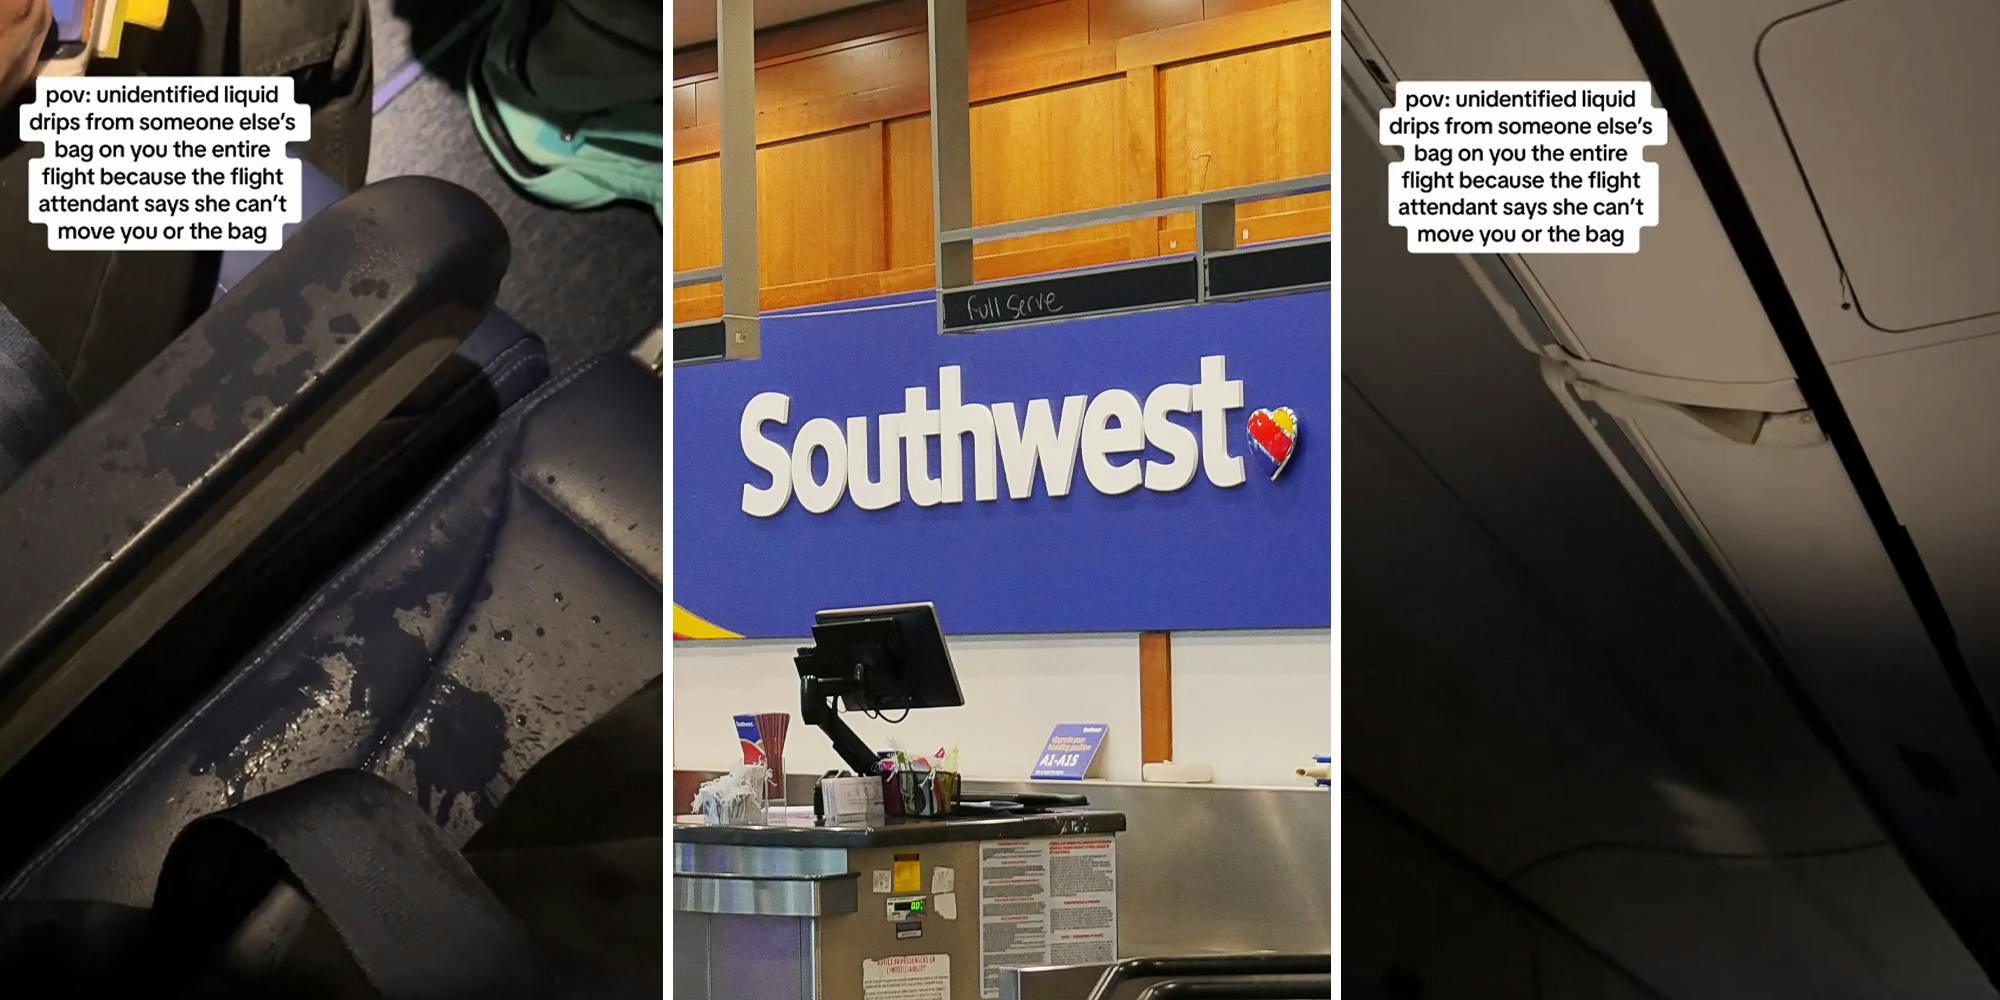 Southwest Airlines passenger gets soaked after liquid drips from someone’s baggage in the overhead bin.